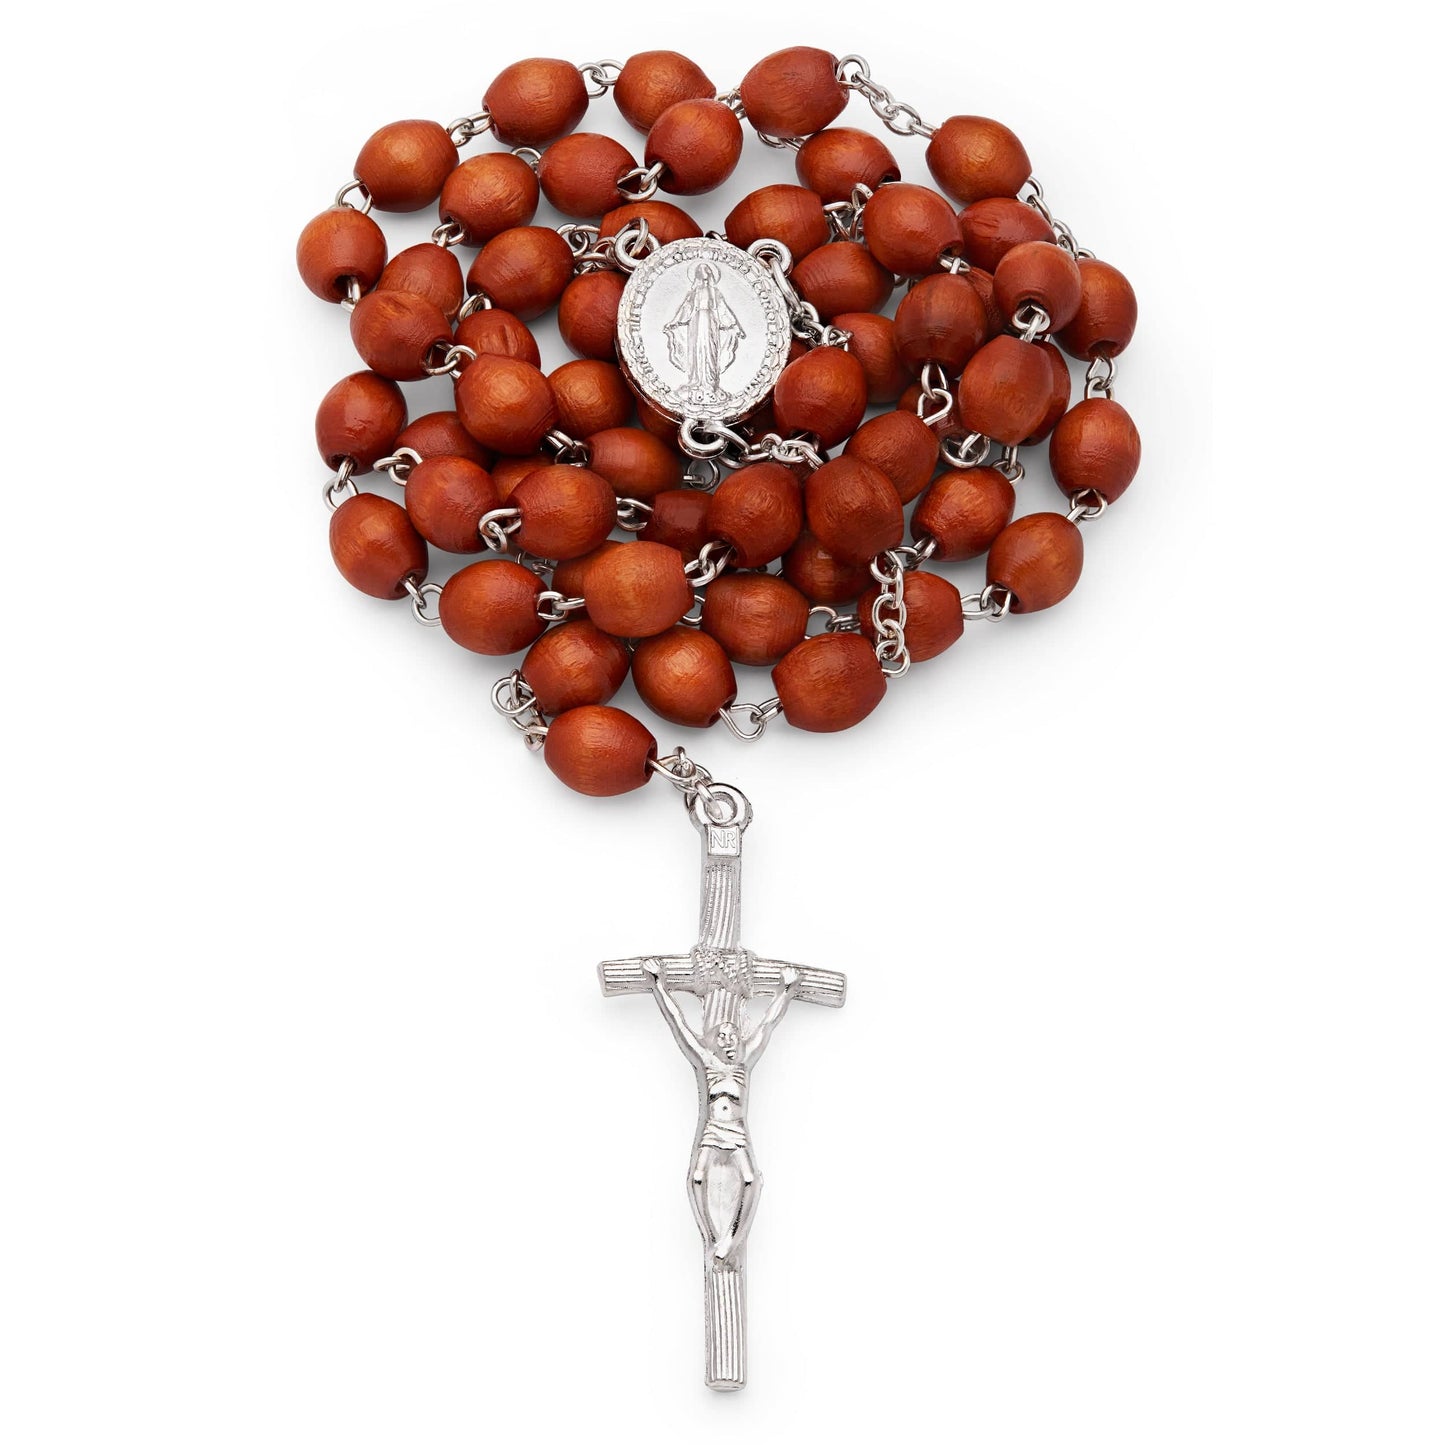 MONDO CATTOLICO Prayer Beads 53 cm (20.90 in) / 7 mm (0.30 in) White Box and Rosary with Mater Ecclesiae Virgin